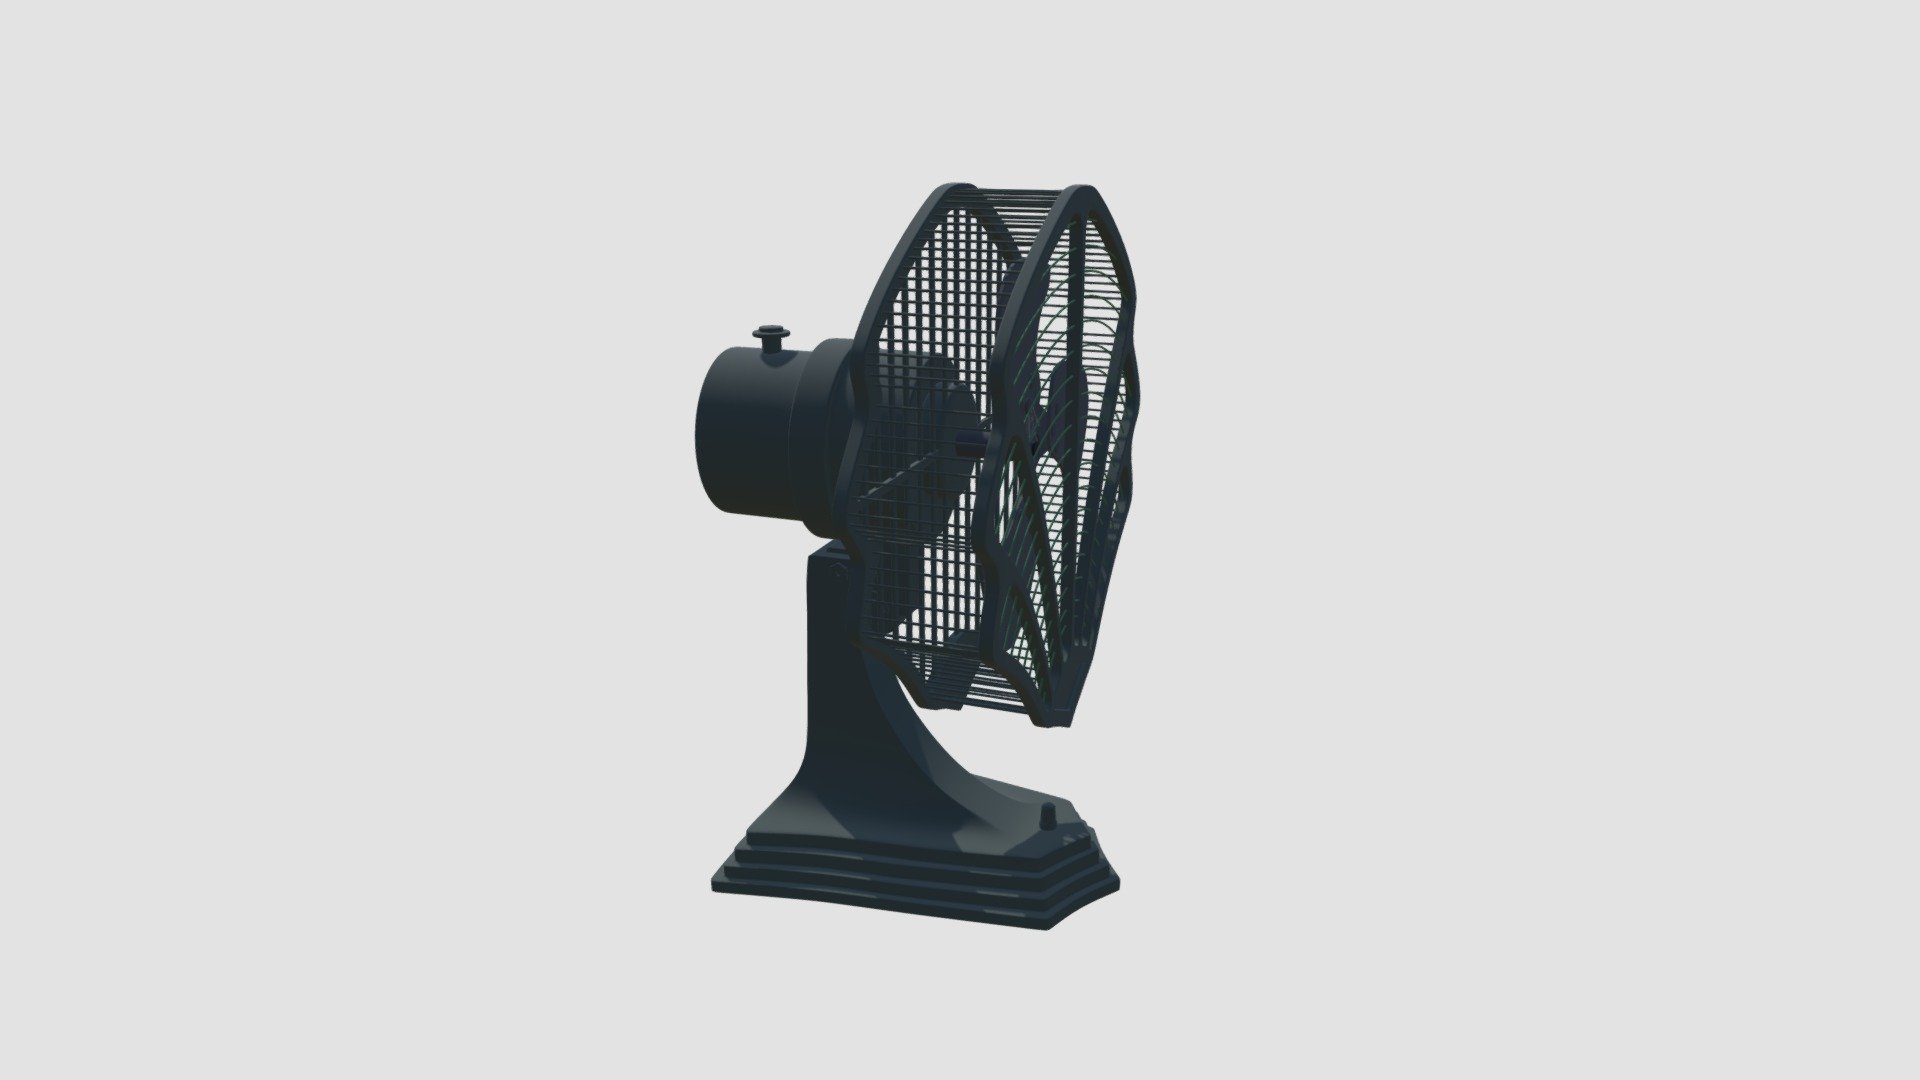 Highly detailed 3d model of fan with all textures, shaders and materials. It is ready to use, just put it into your scene 3d model